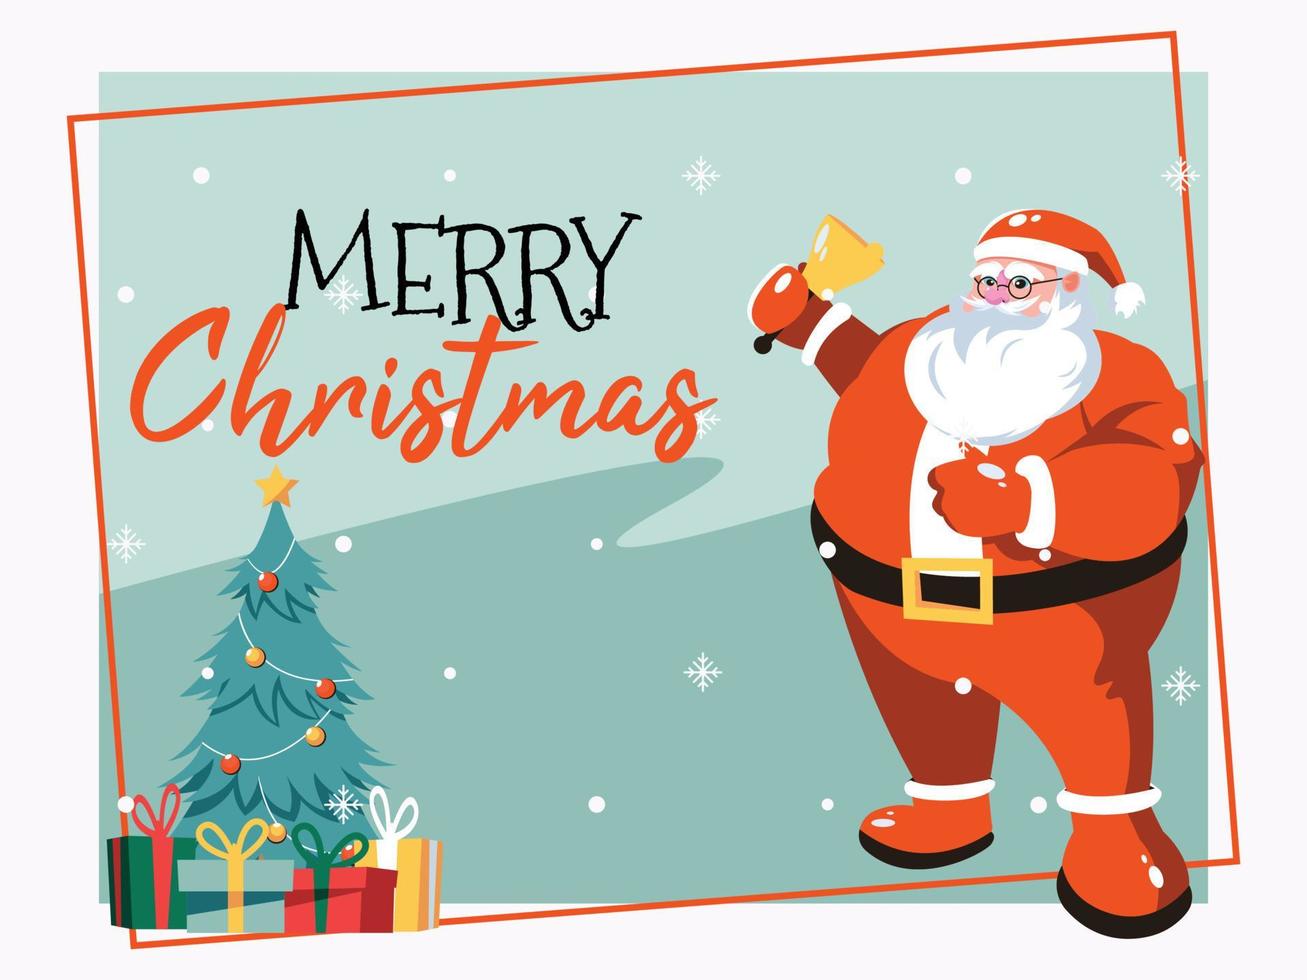 Merry Christmas greeting card with cartoon Santa Claus and Christmas tree with presents vector